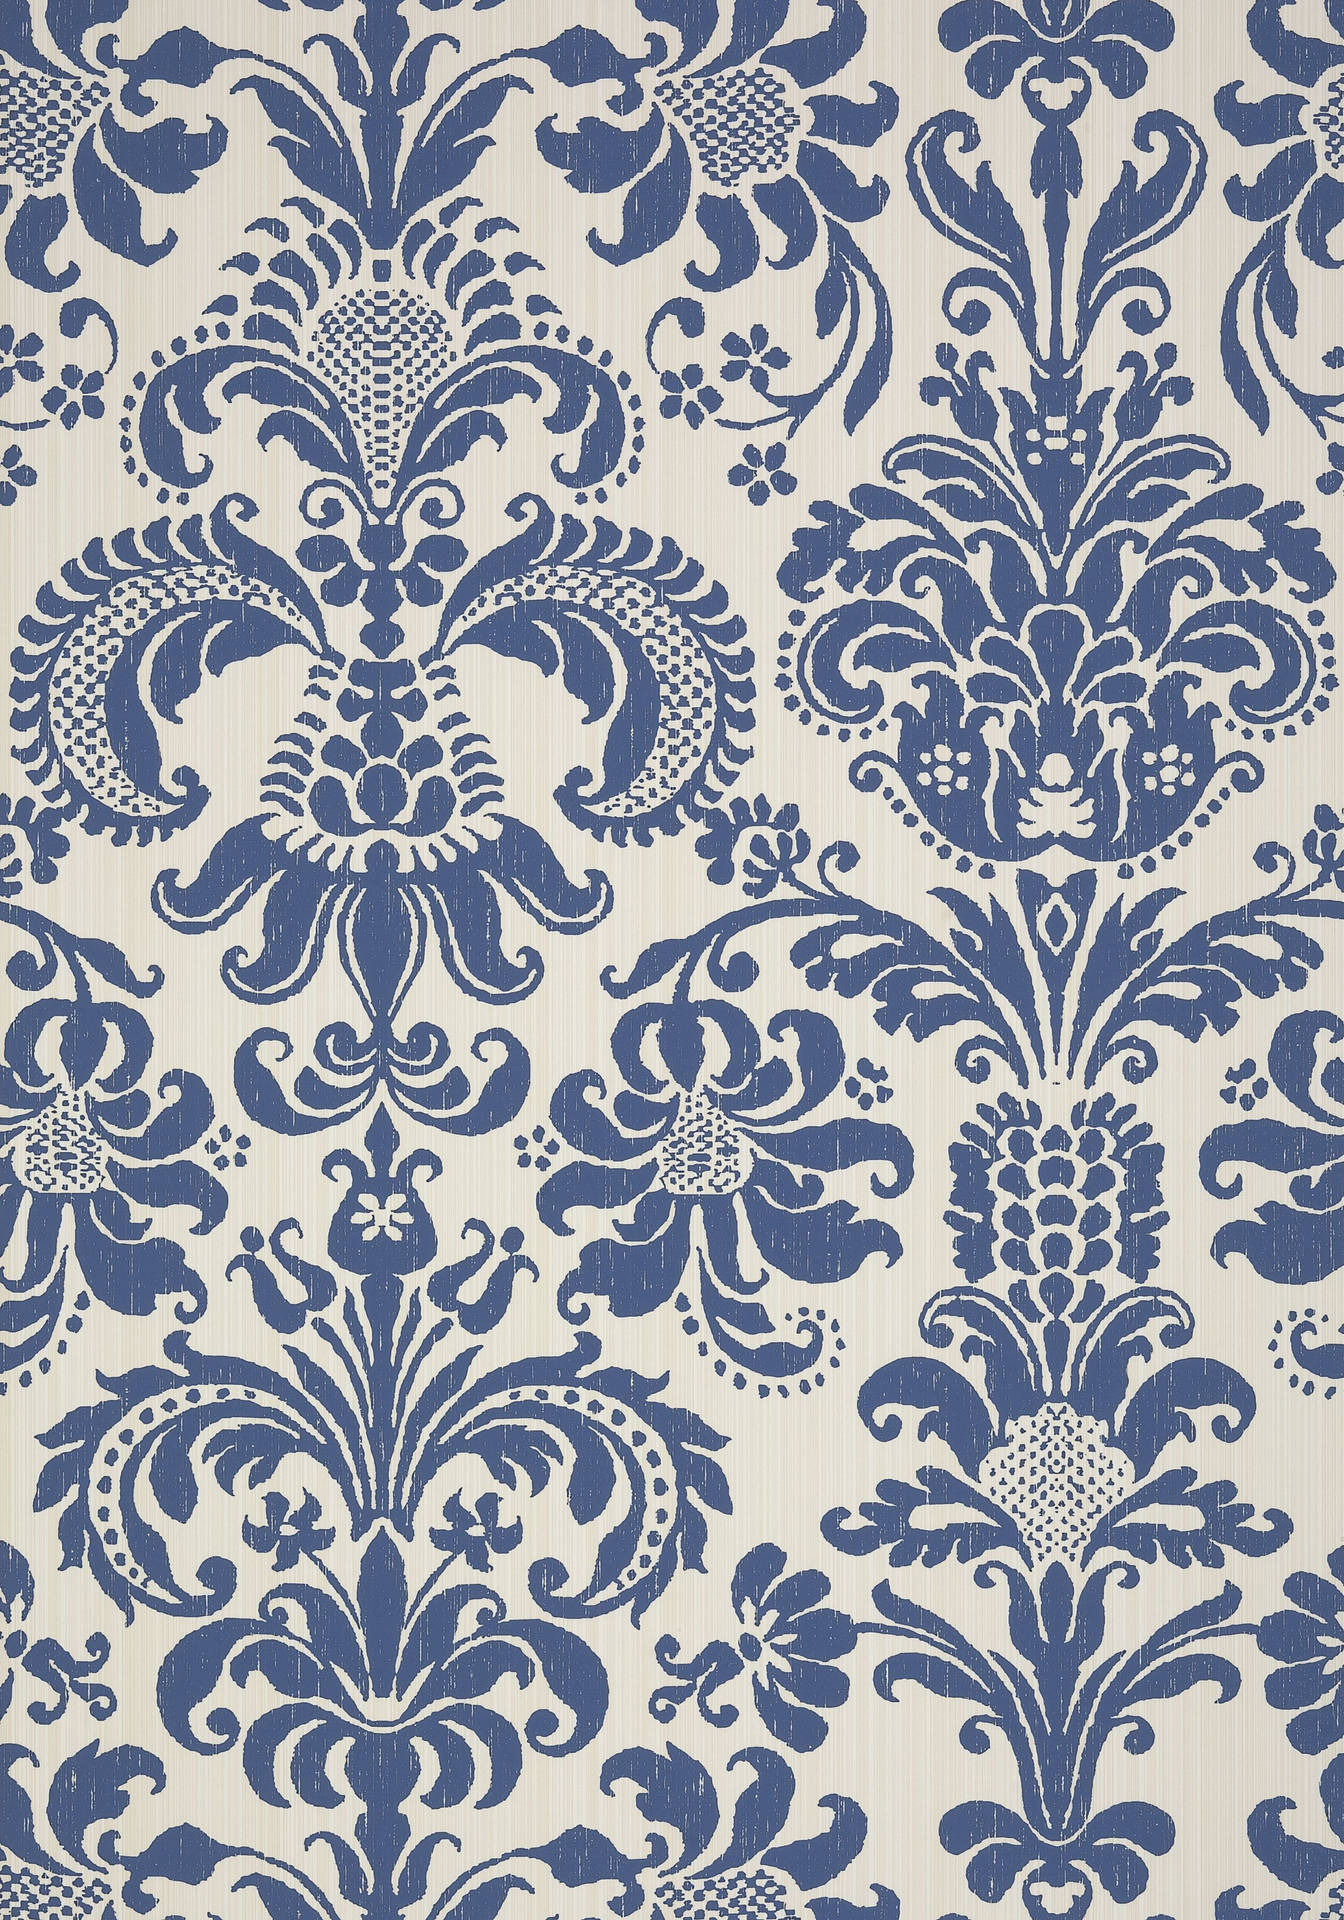 A Luxurious Combination Of Nautical Blue And Regal Gold In A Floral Print Background